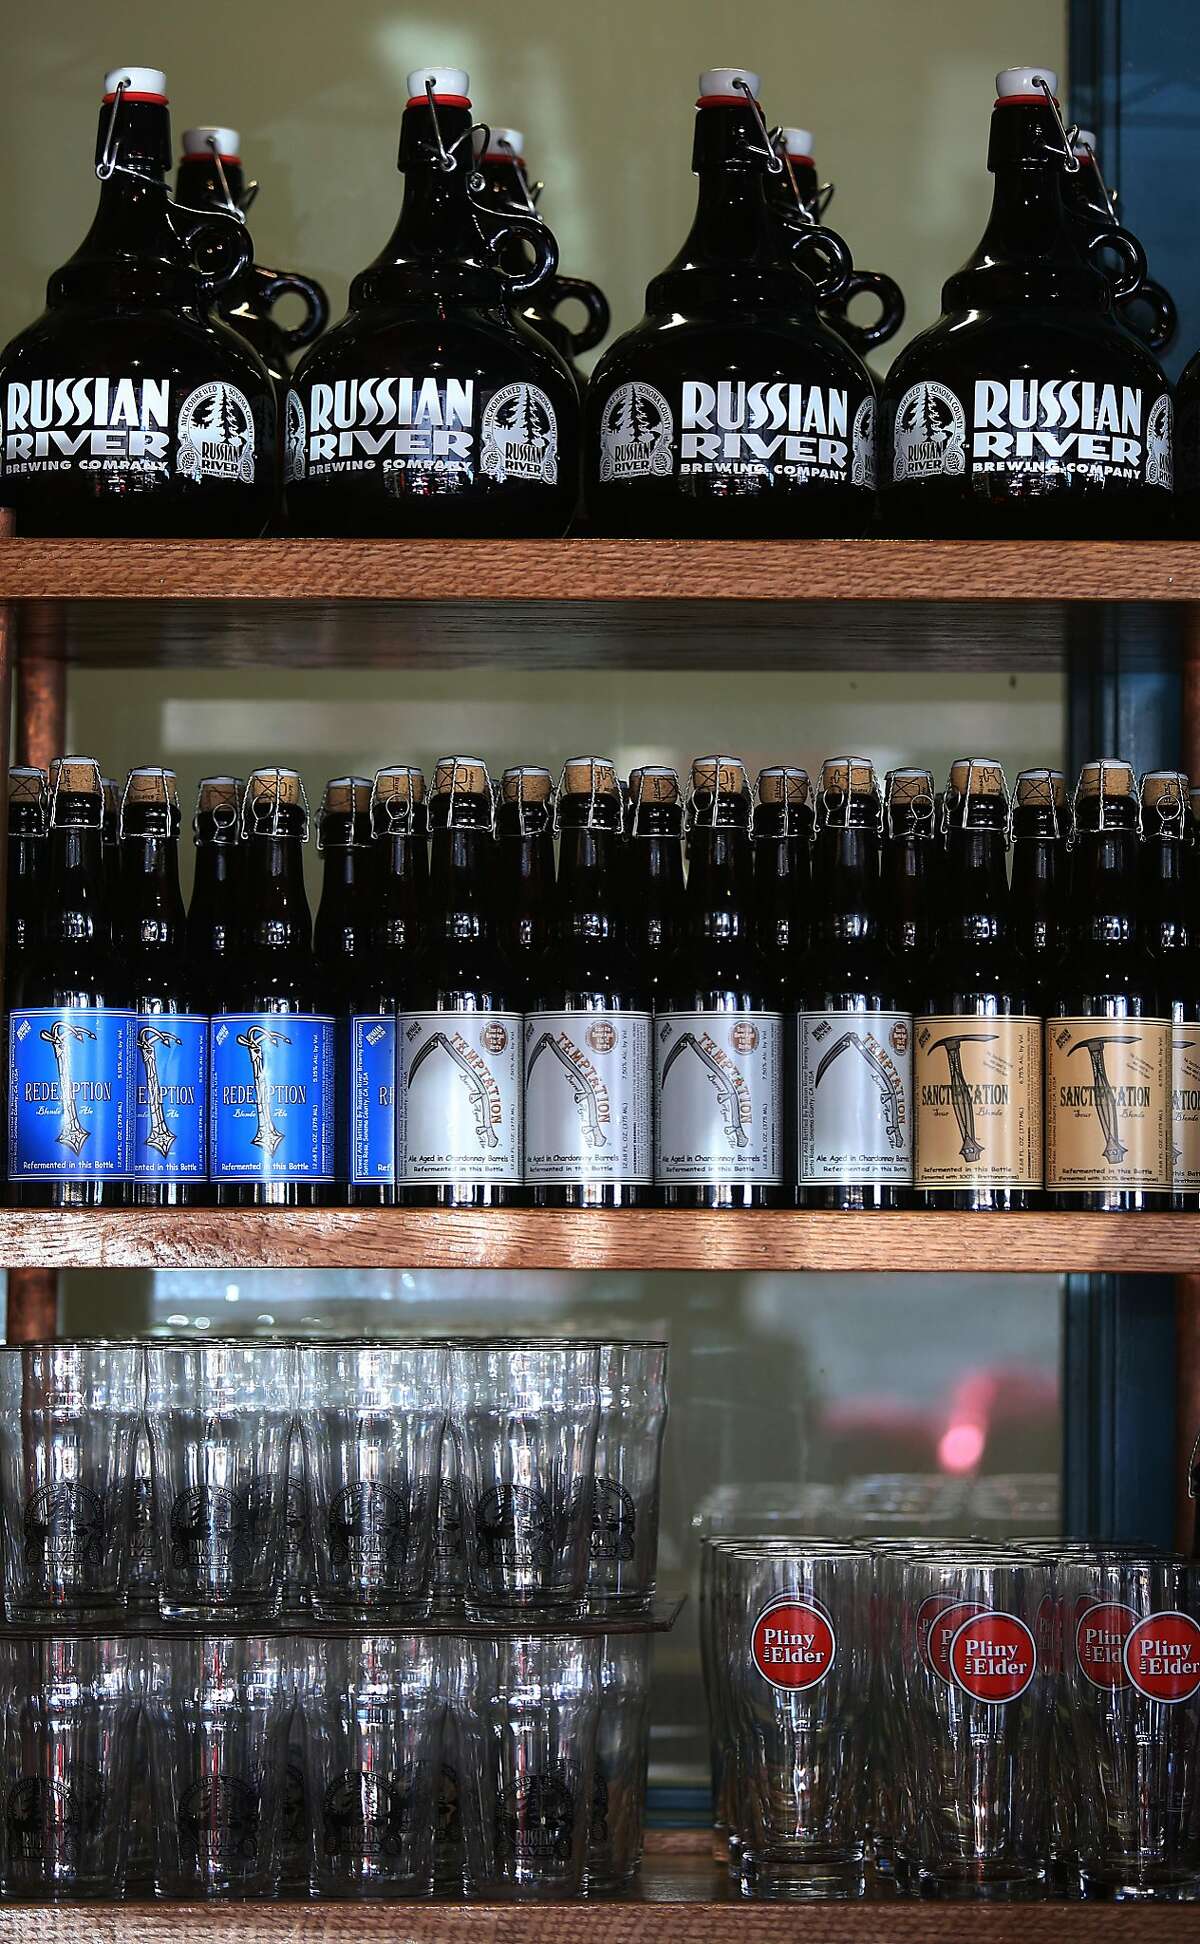 Bottles of beer, glasses, and growlers displayed at the Russian River Brewing Company brewpub in Santa Rosa, Calif., on Monday, October 26, 2015.